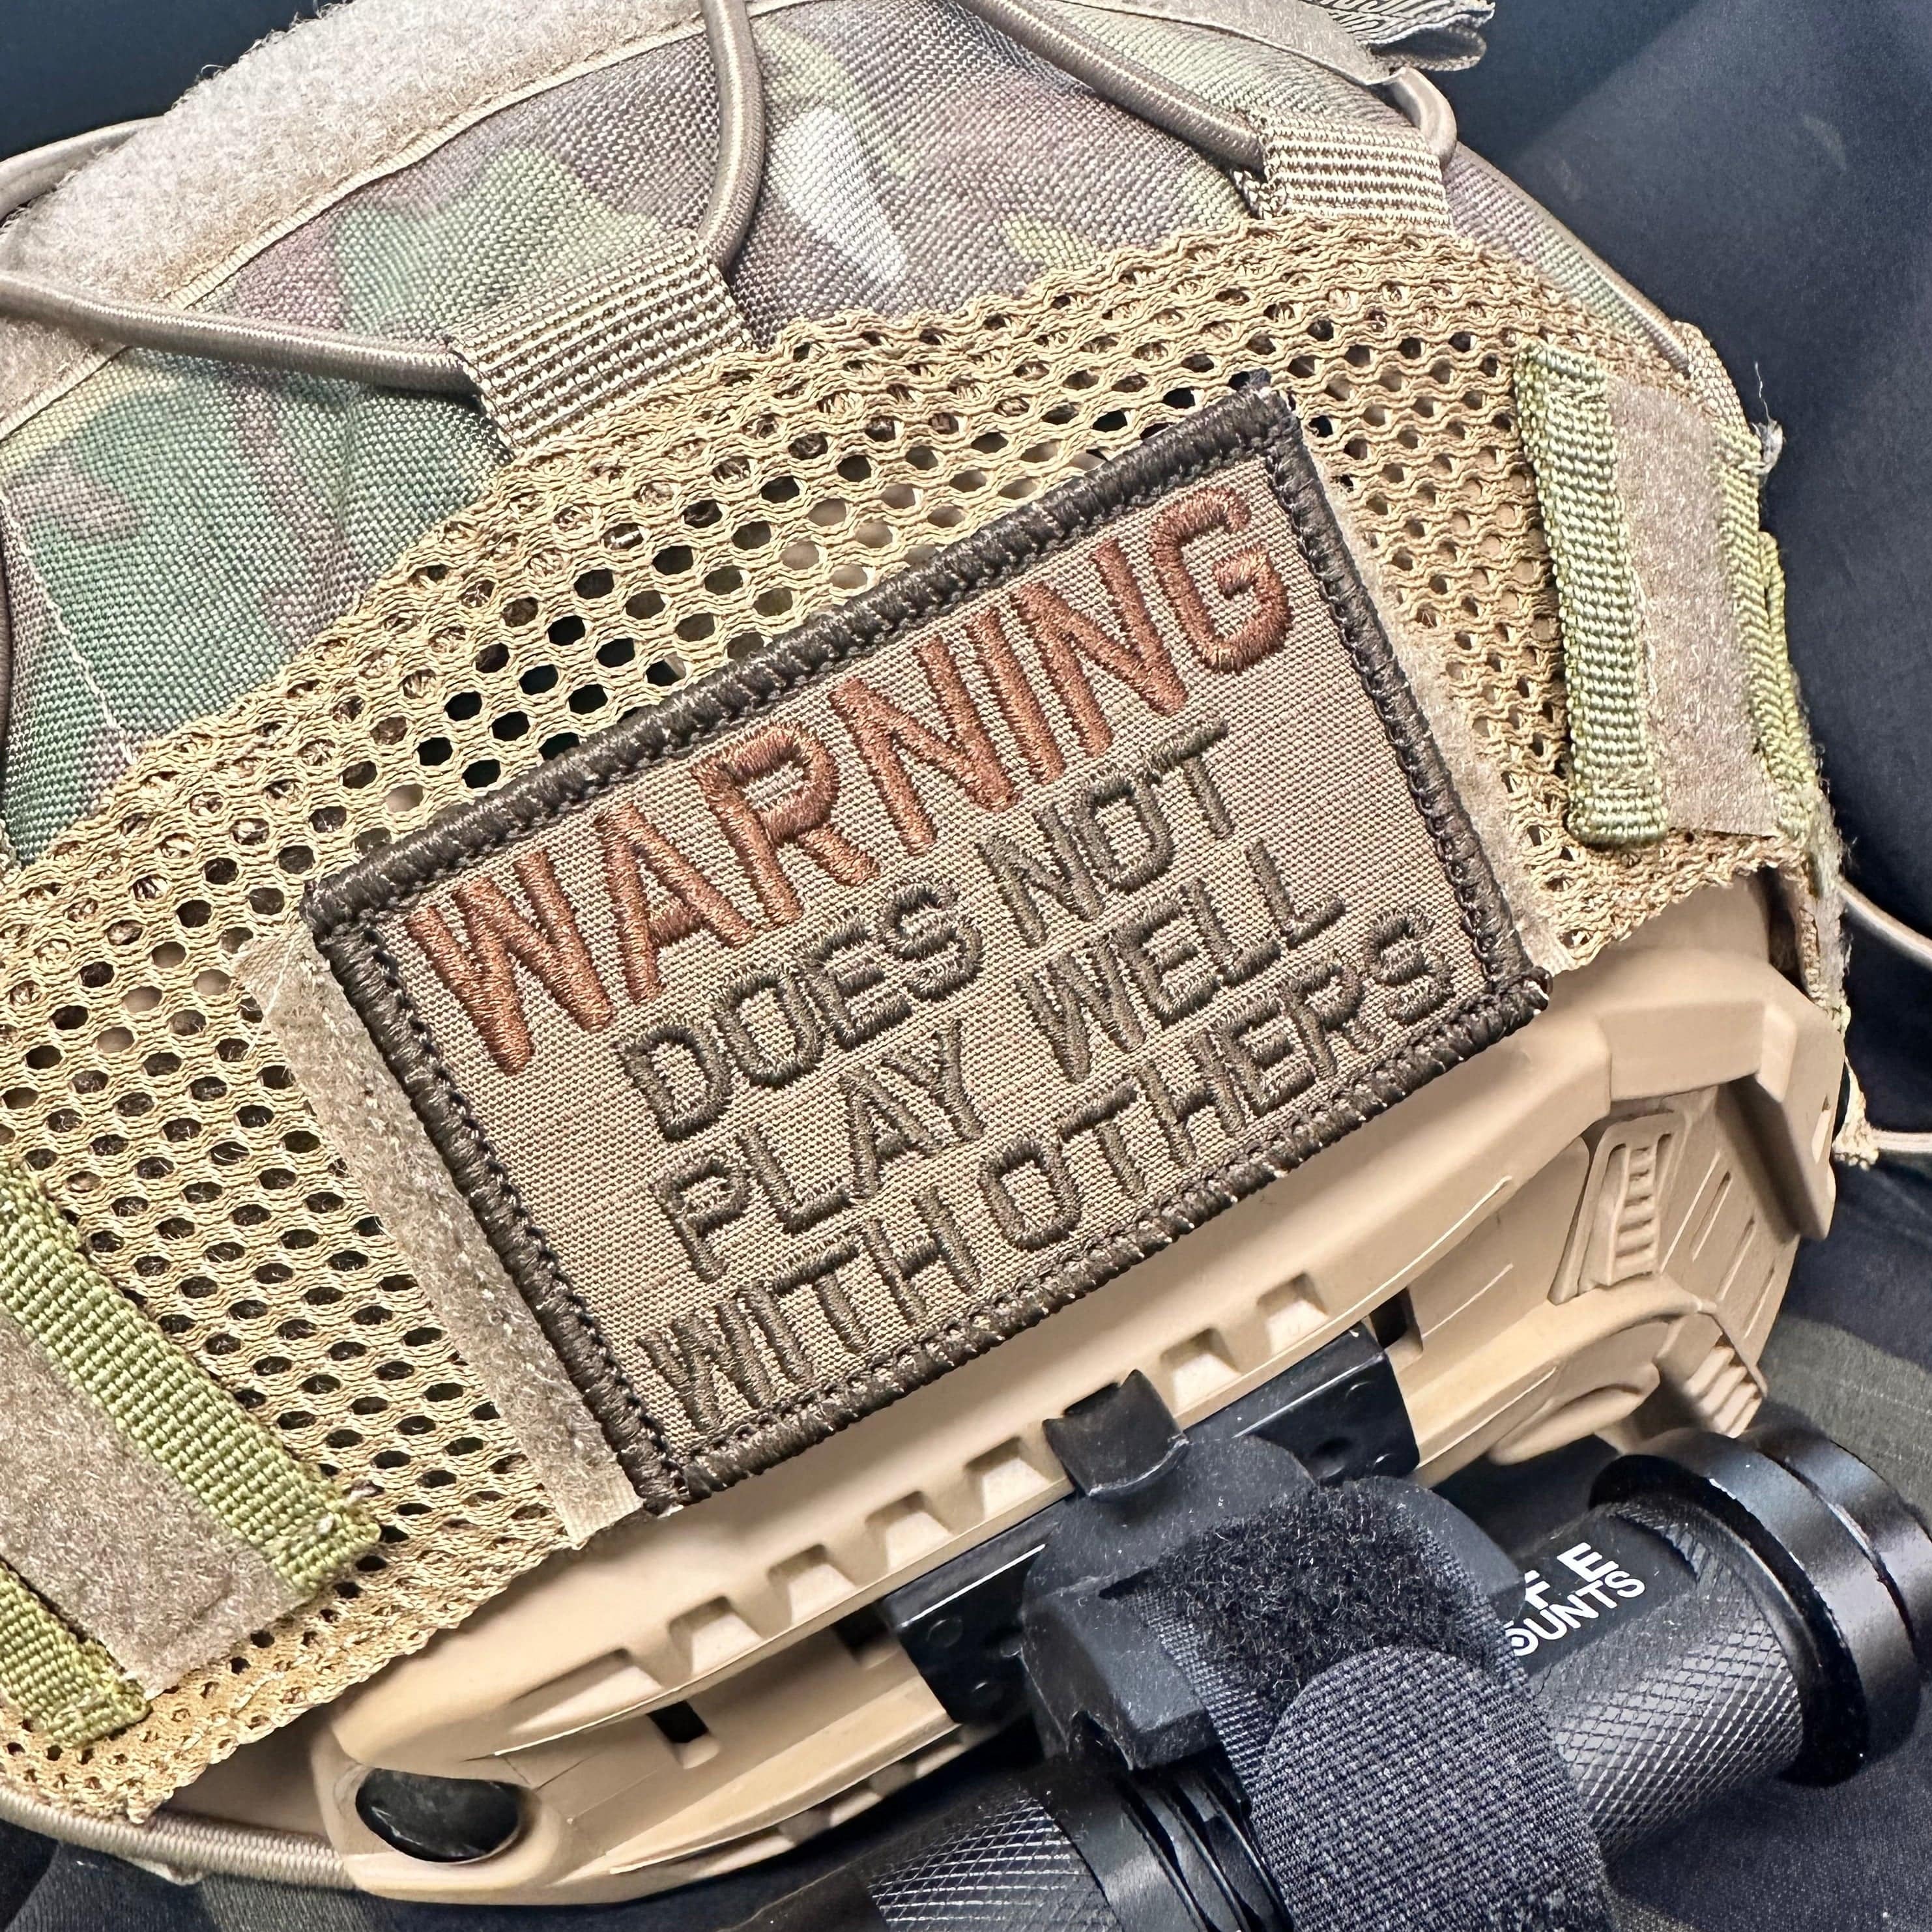 Tactical Gear Junkie Patches WARNING: Does Not Play Well With Others - 2x3 Patch